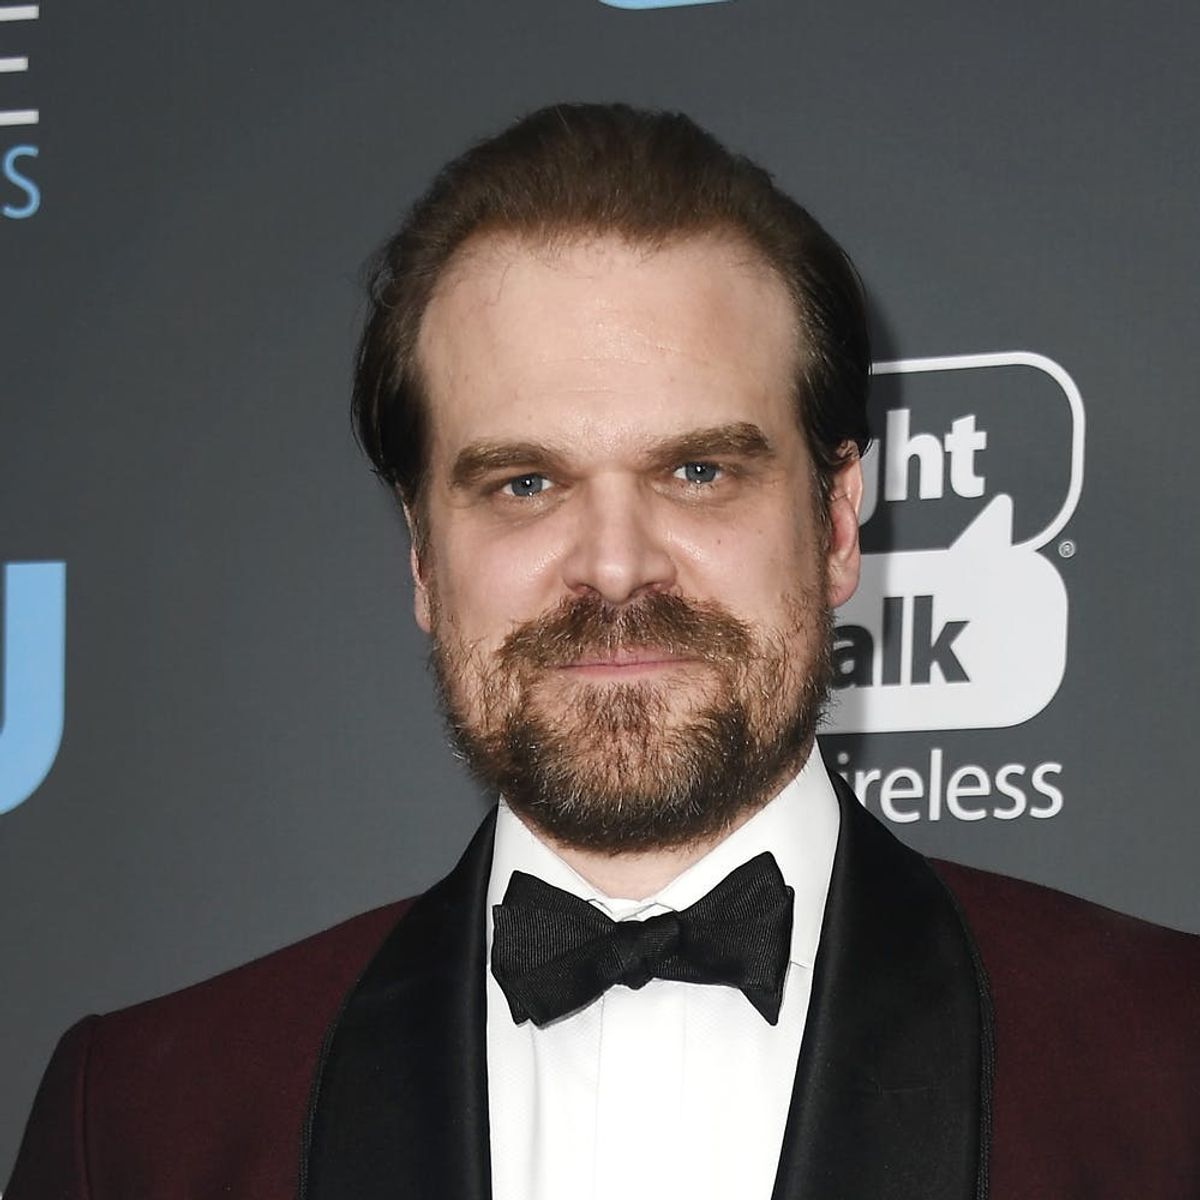 David Harbour Just Increased Our Love for Him Tenfold by Posing for a Fan’s High School Photos